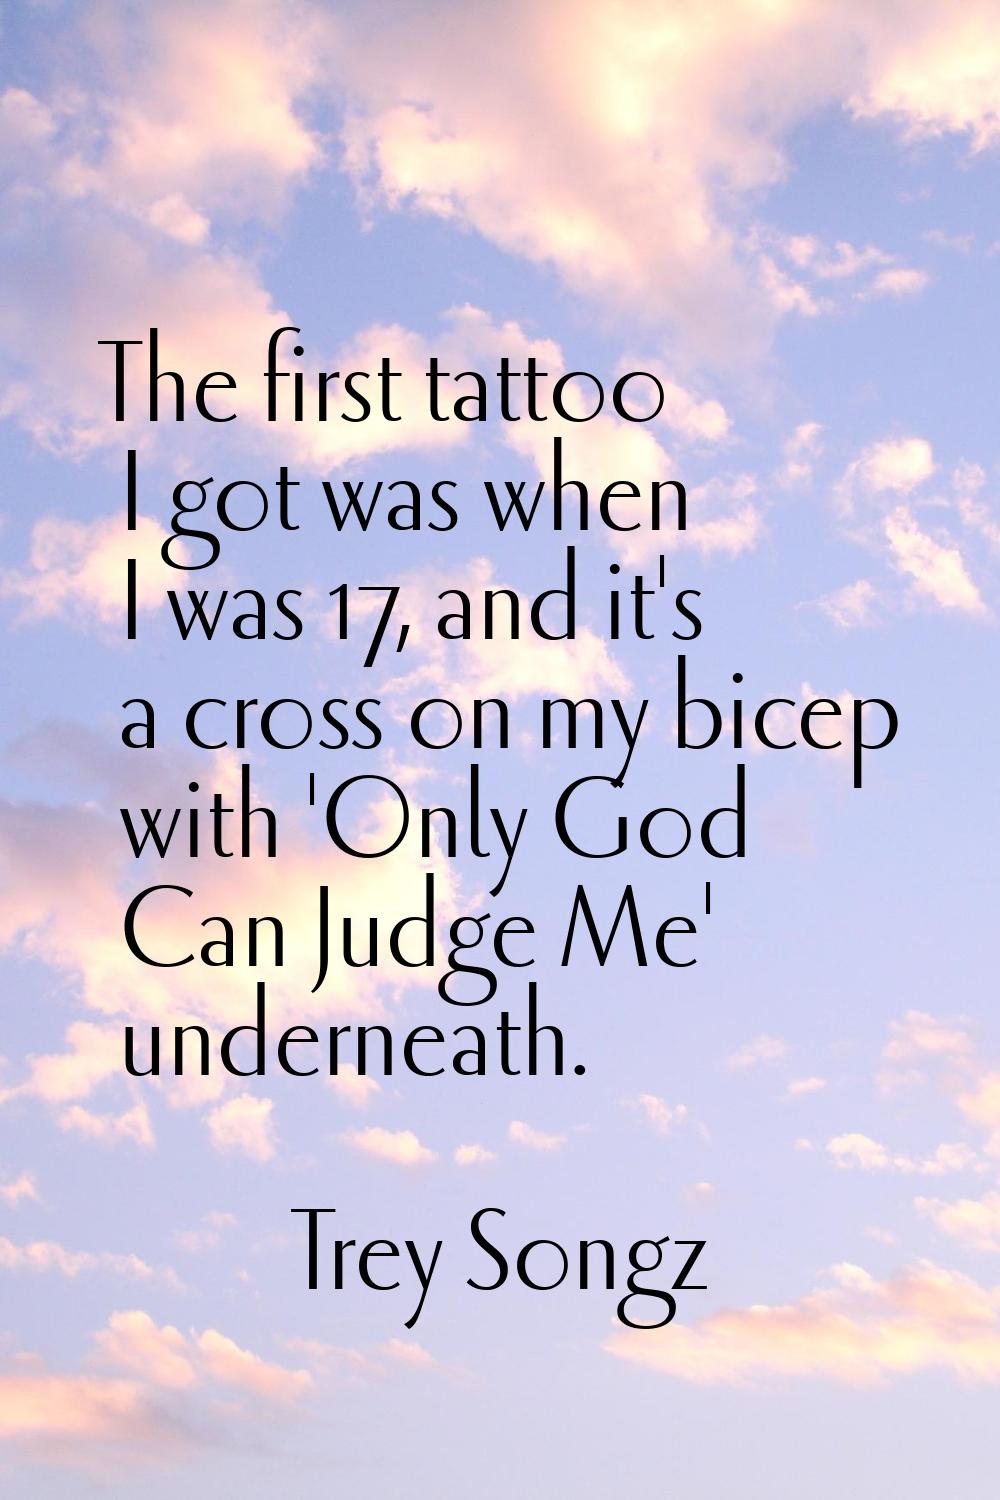 The first tattoo I got was when I was 17, and it's a cross on my bicep with 'Only God Can Judge Me'